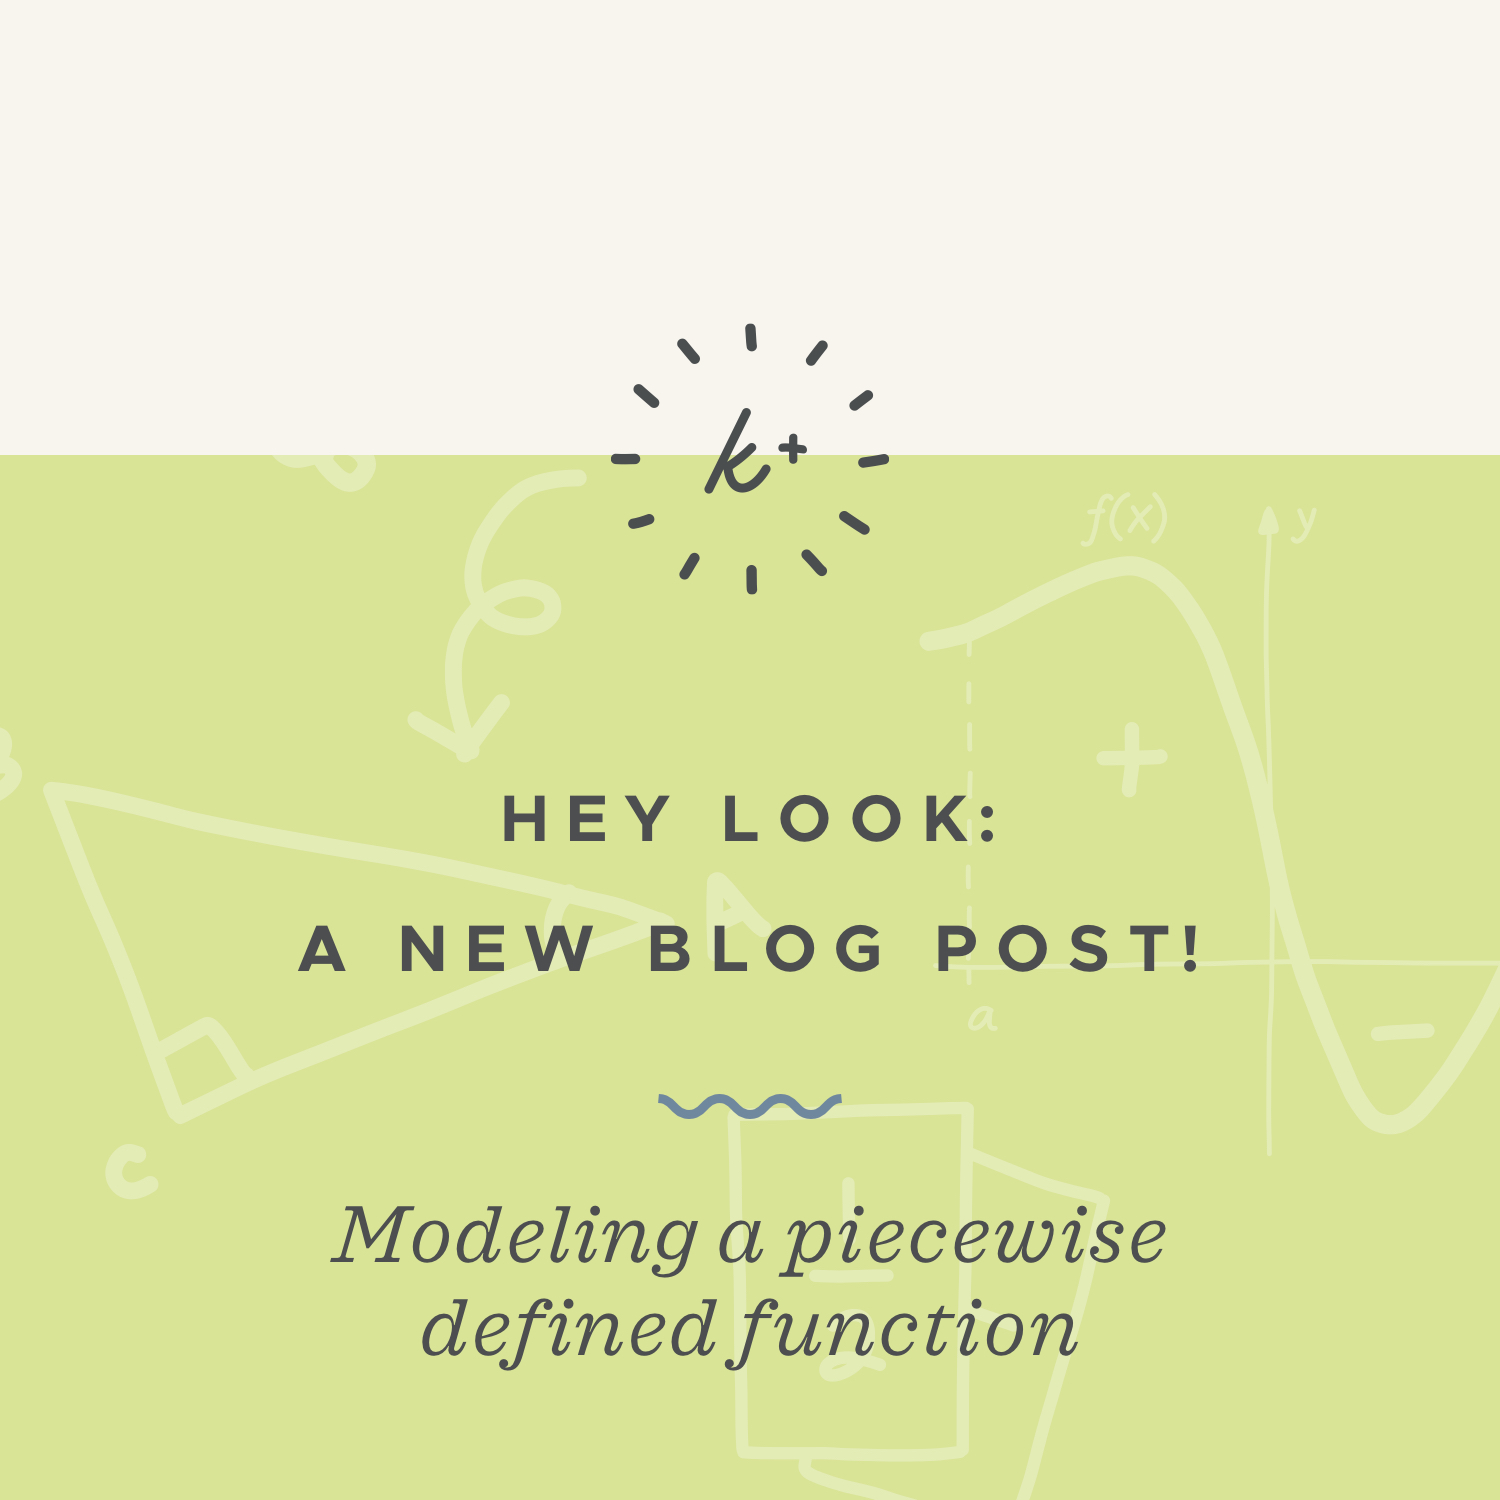 Modeling a piecewise defined function blog post.jpeg